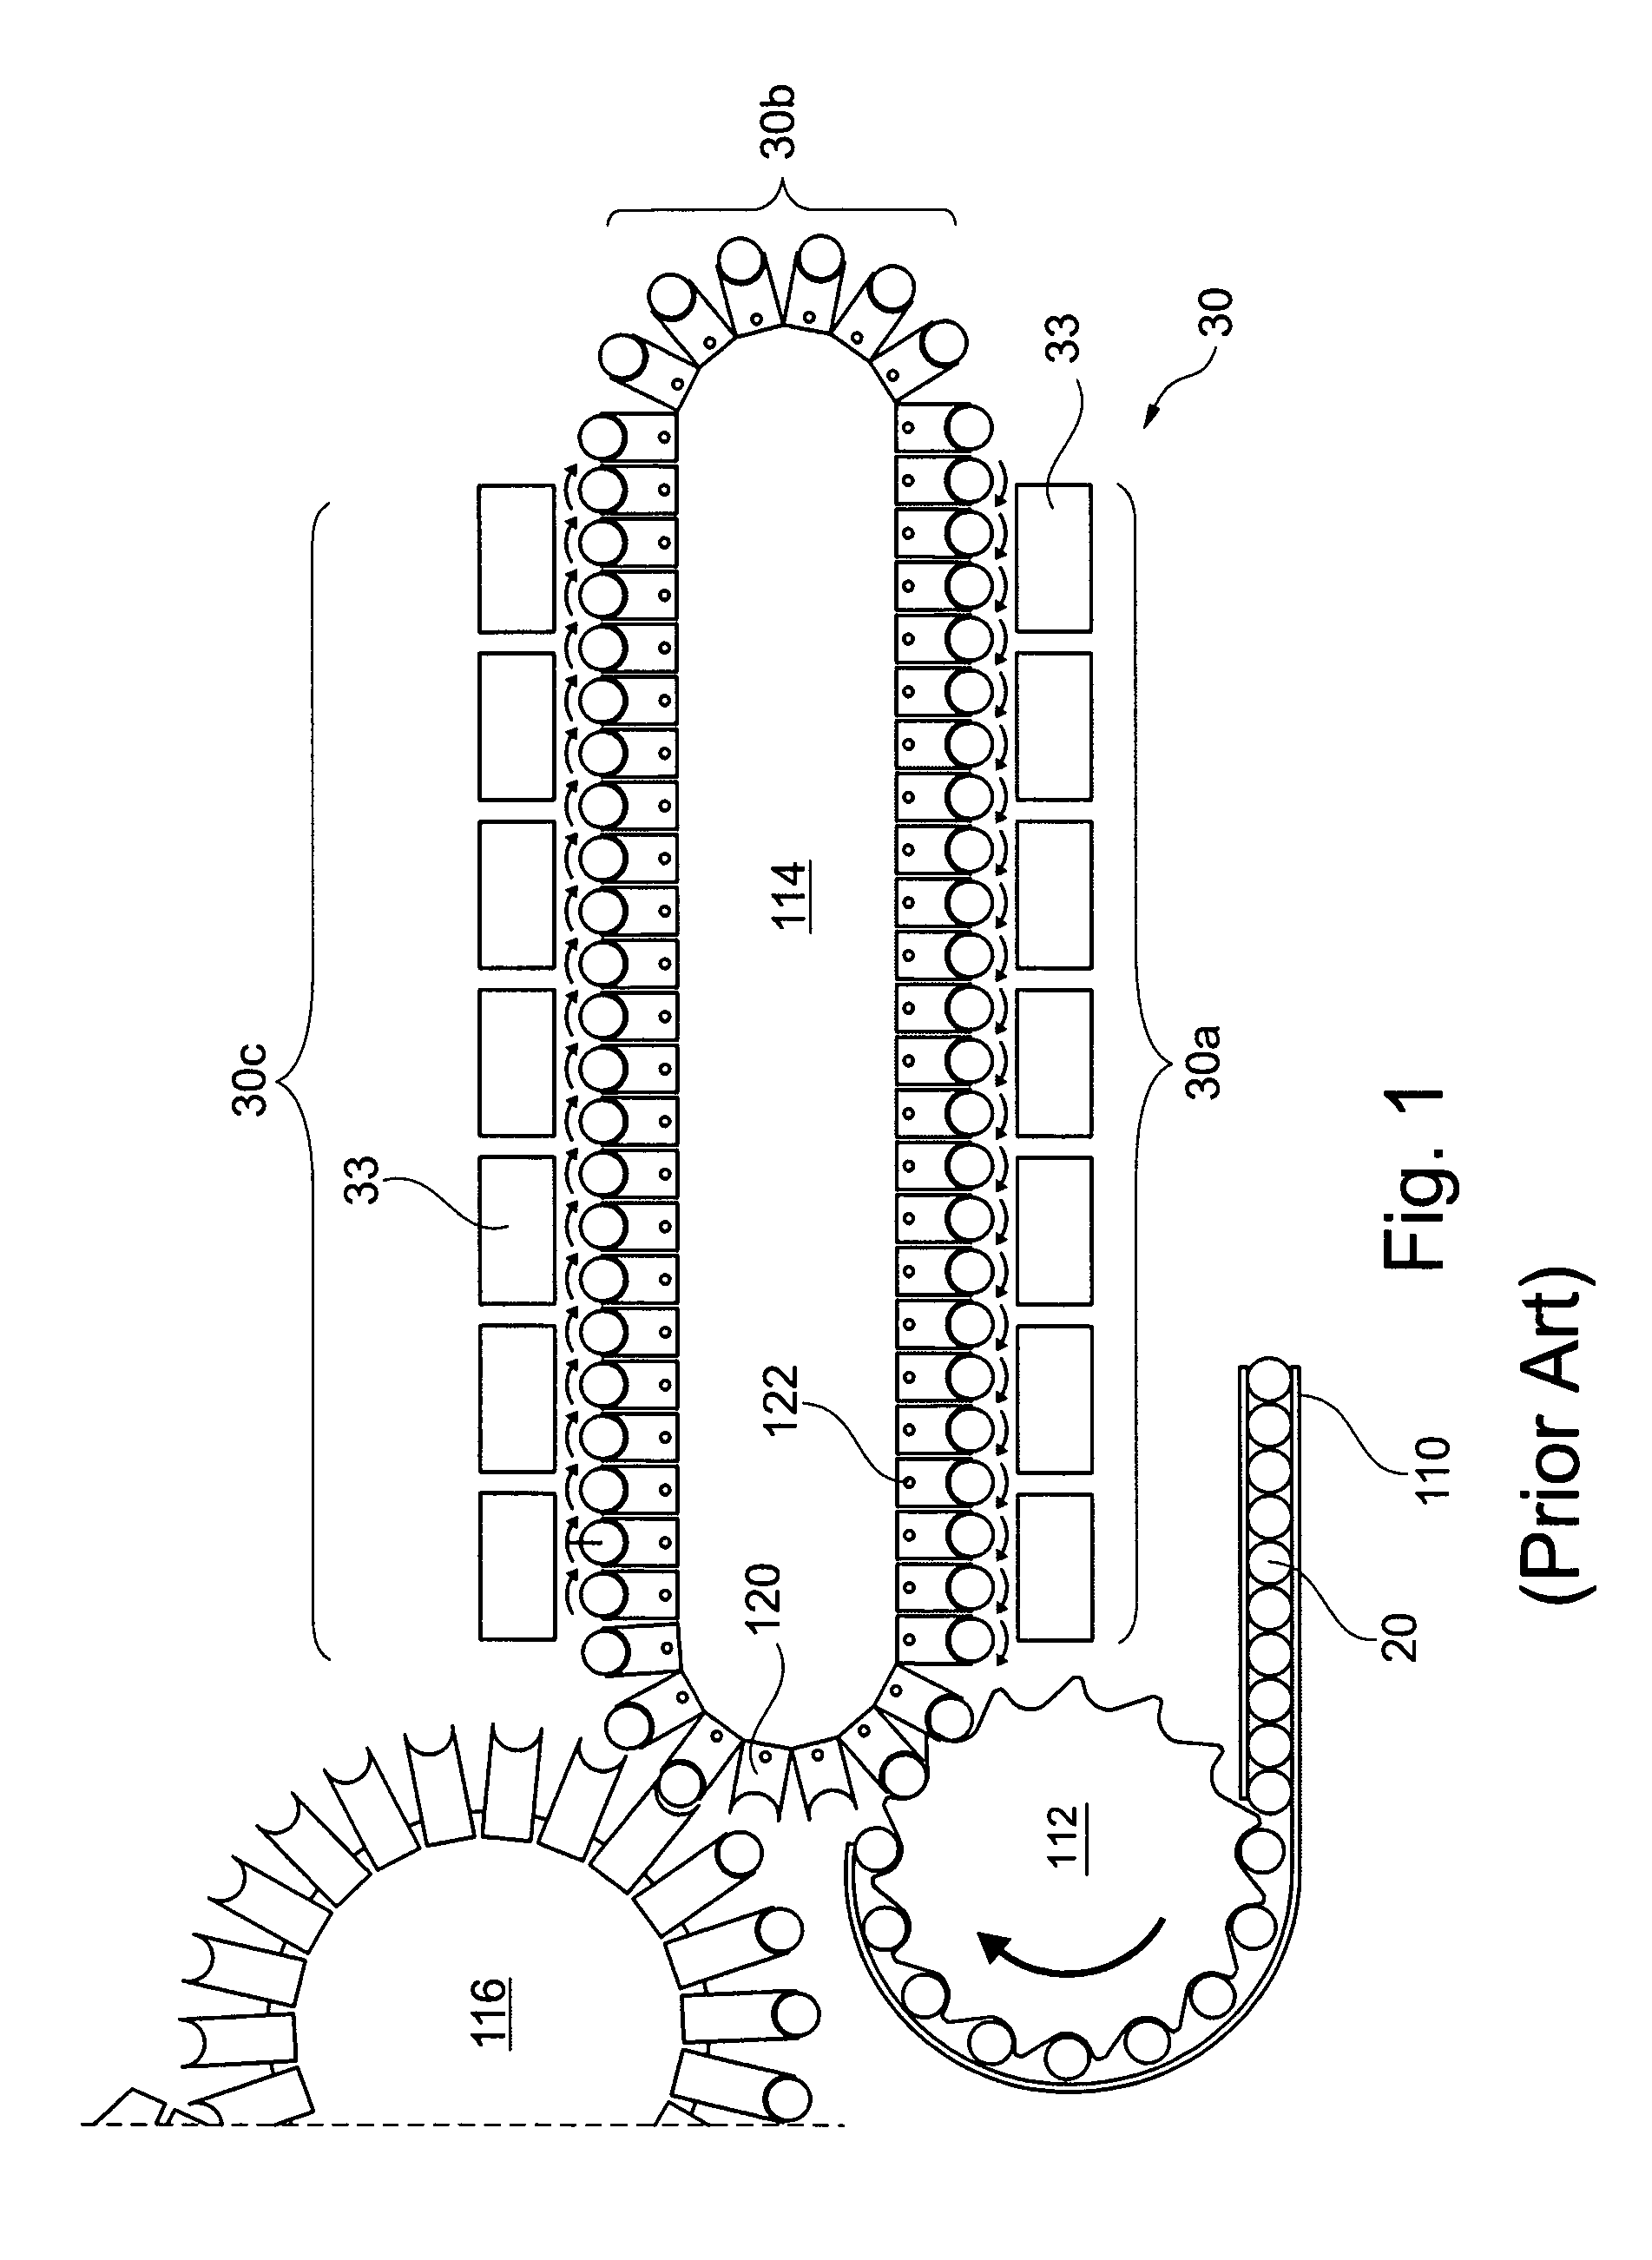 Method and device for cooling of IR emitters for preforms